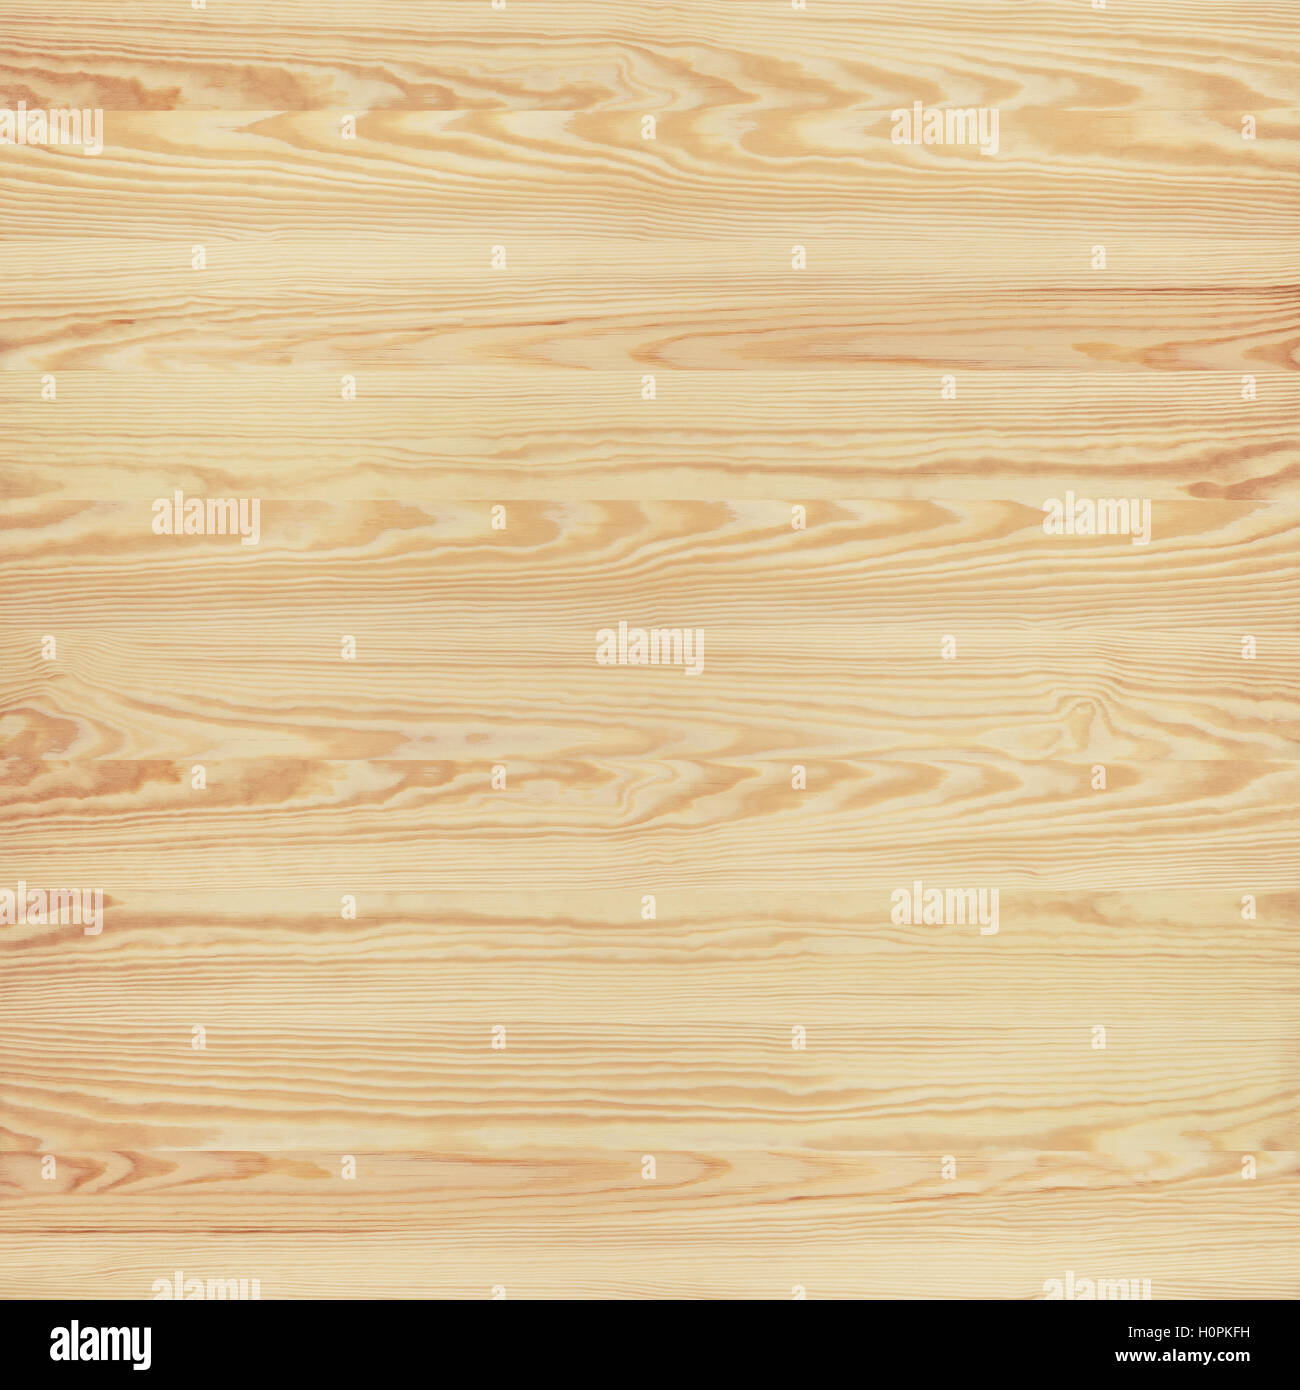 Light yellow wood background. Natural pine board texture. Table size timber panel. Stock Photo